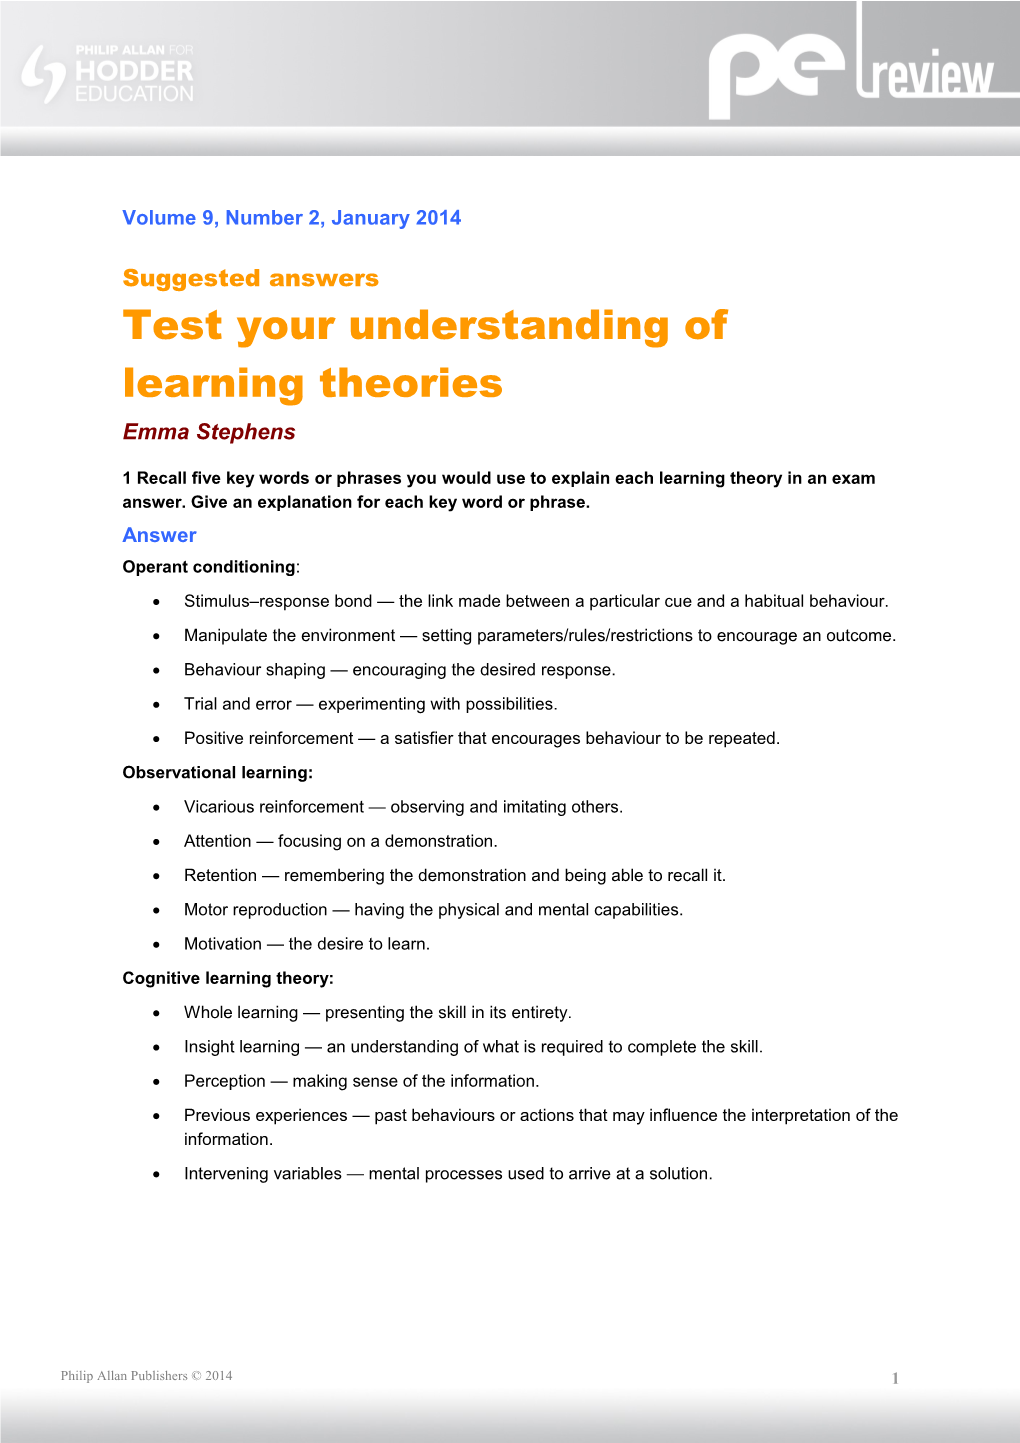 Test Your Understanding of Learning Theories